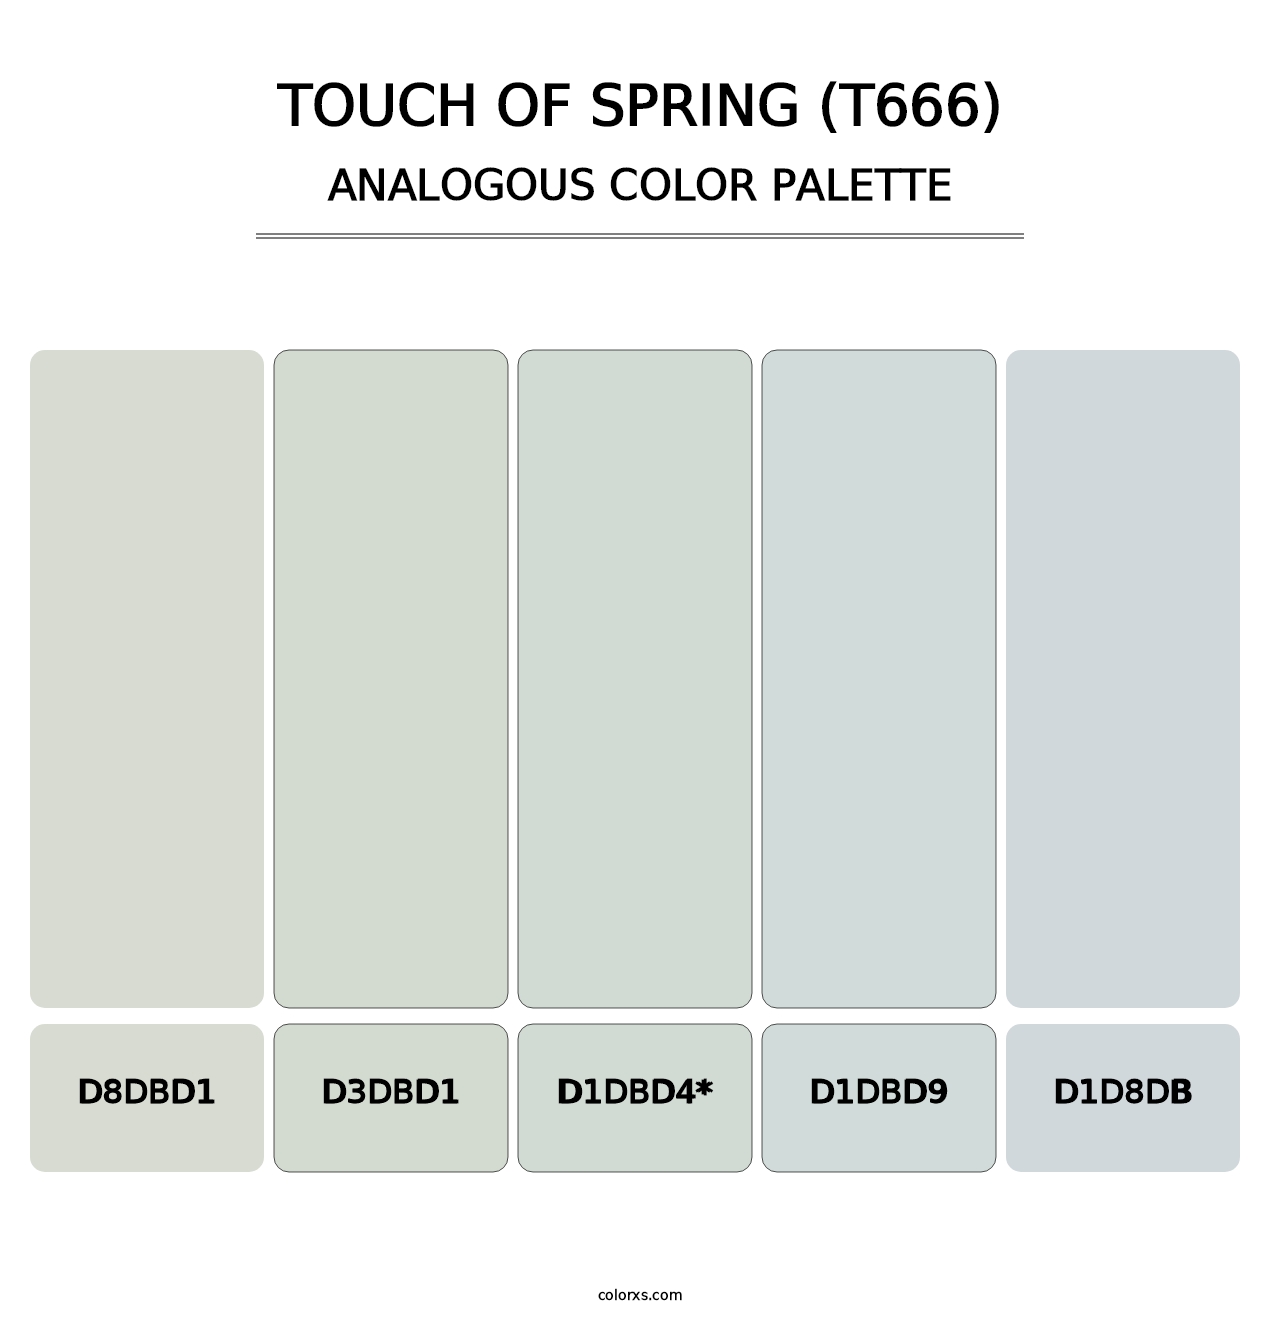 Touch of Spring (T666) - Analogous Color Palette